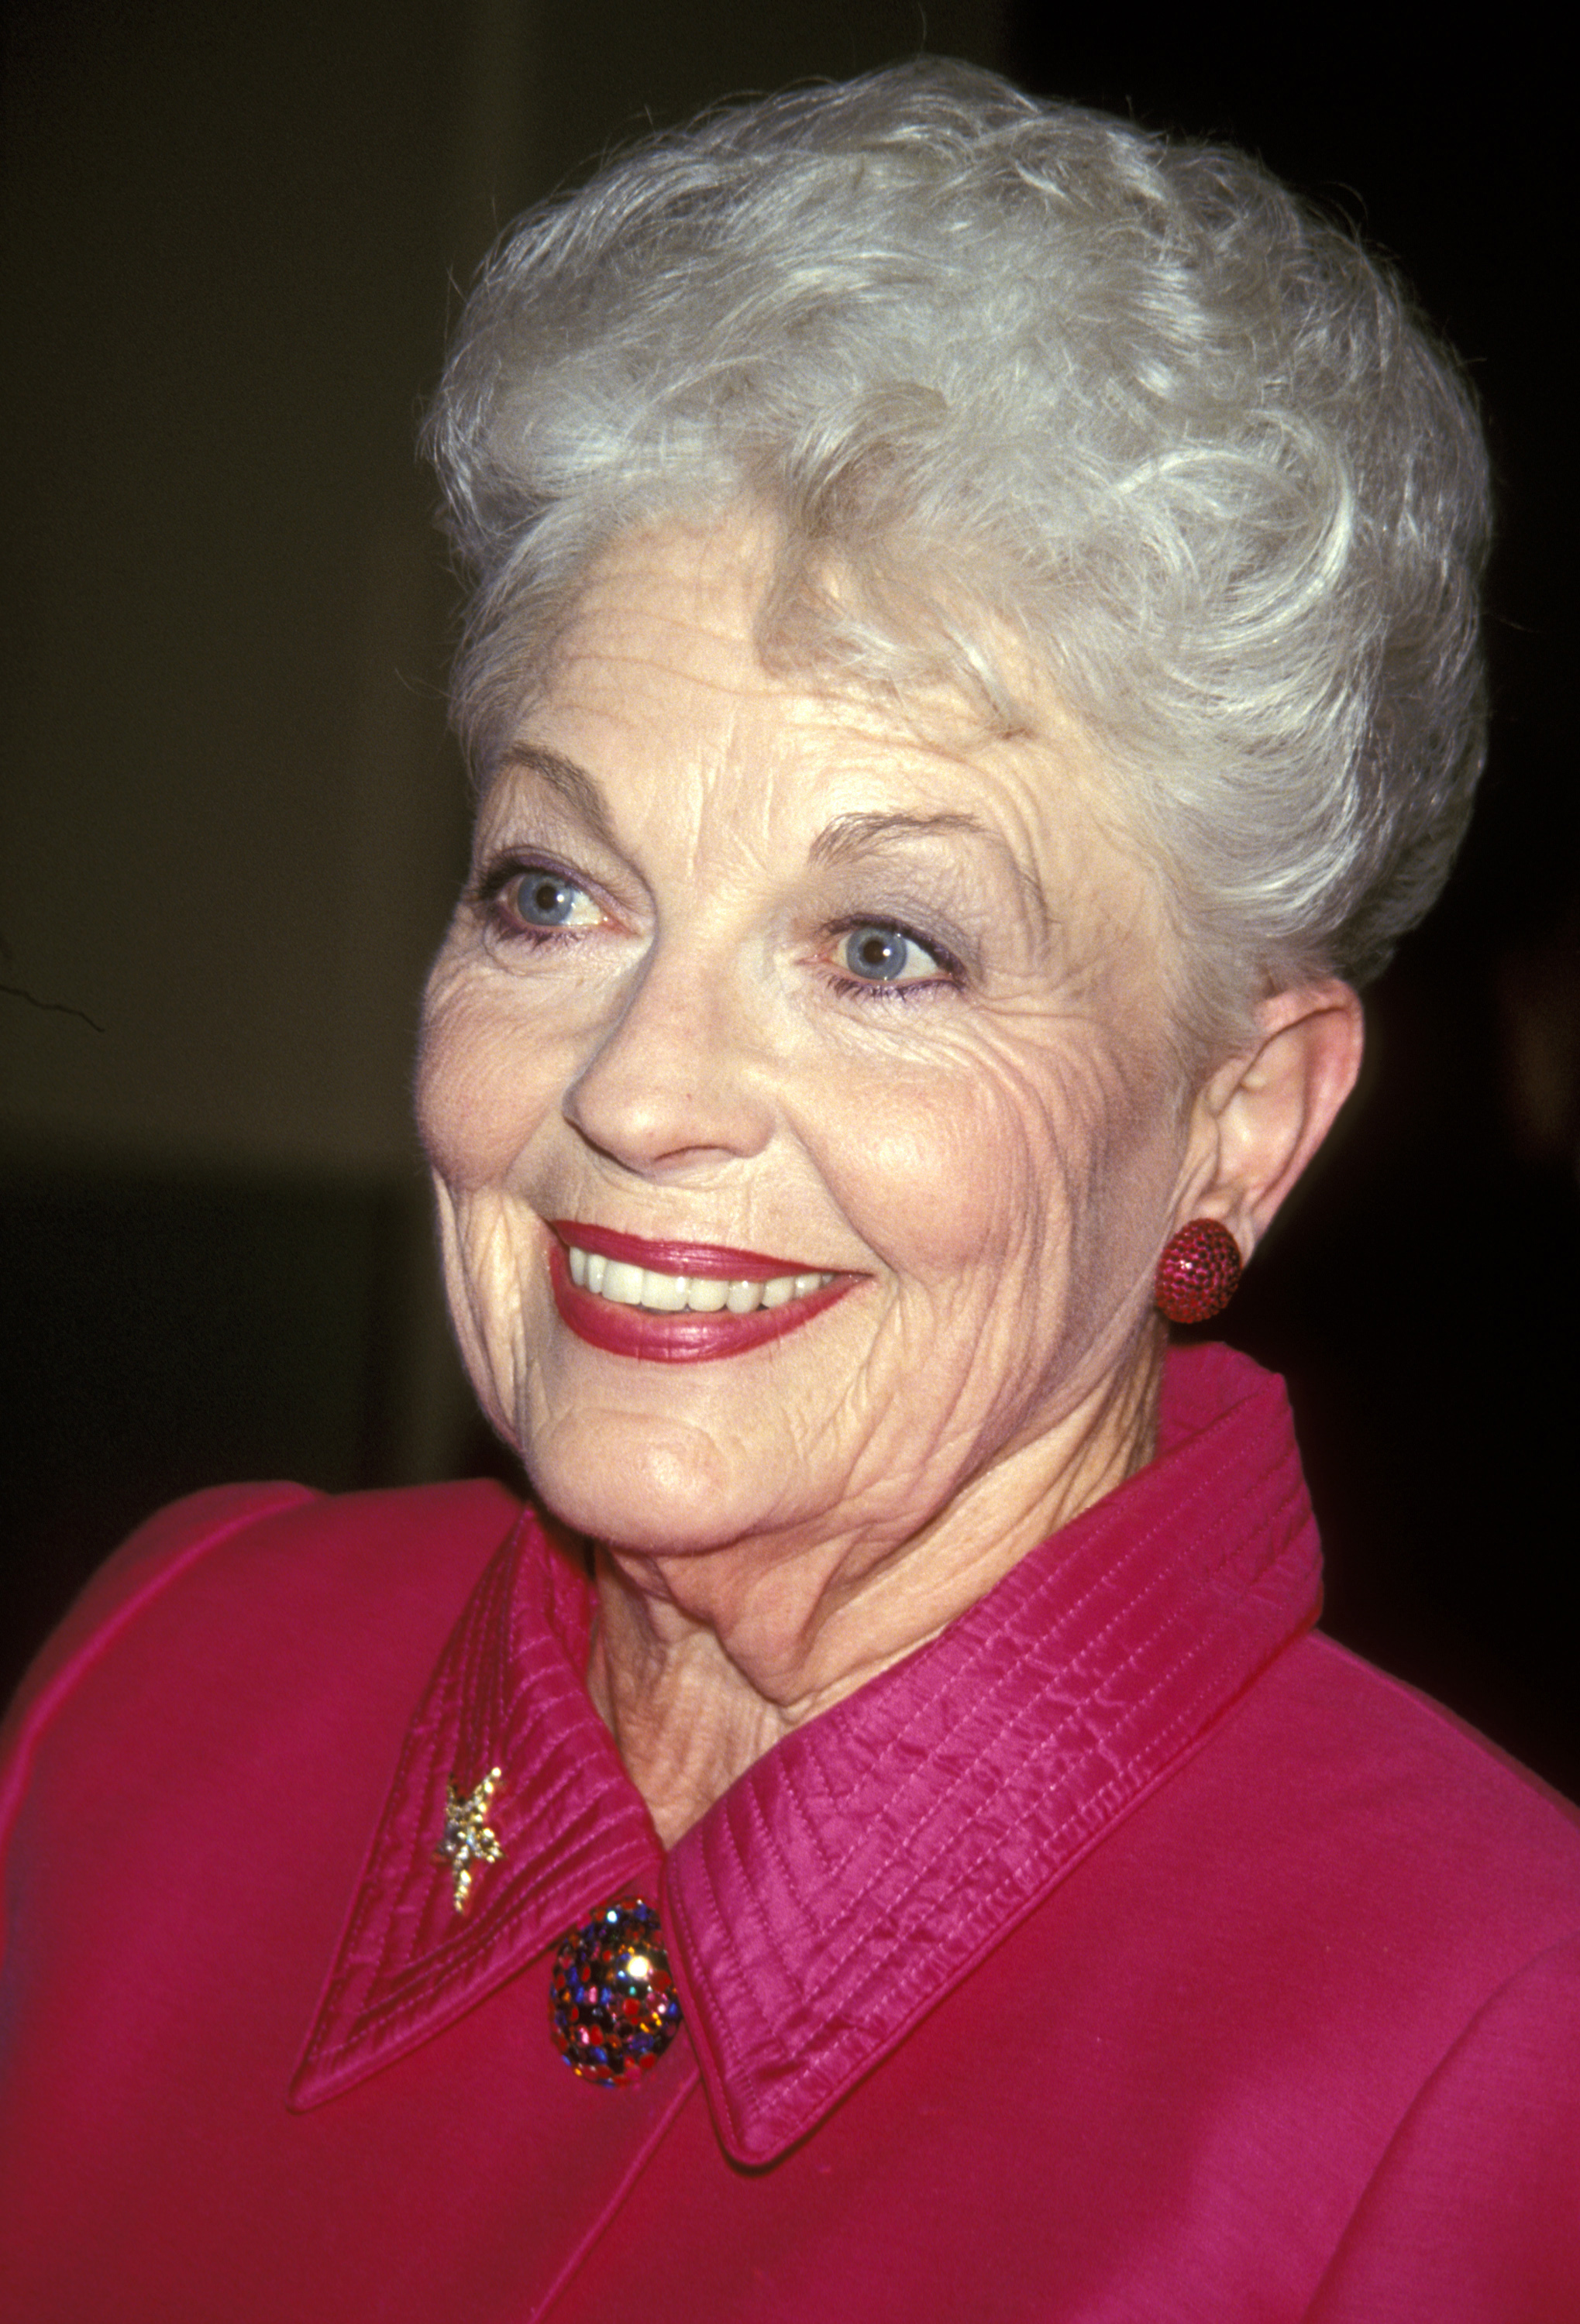 Former Gov. Ann Richards in New York City, on Sept. 10, 1994. (Ron Galella / WireImage / Getty Images)